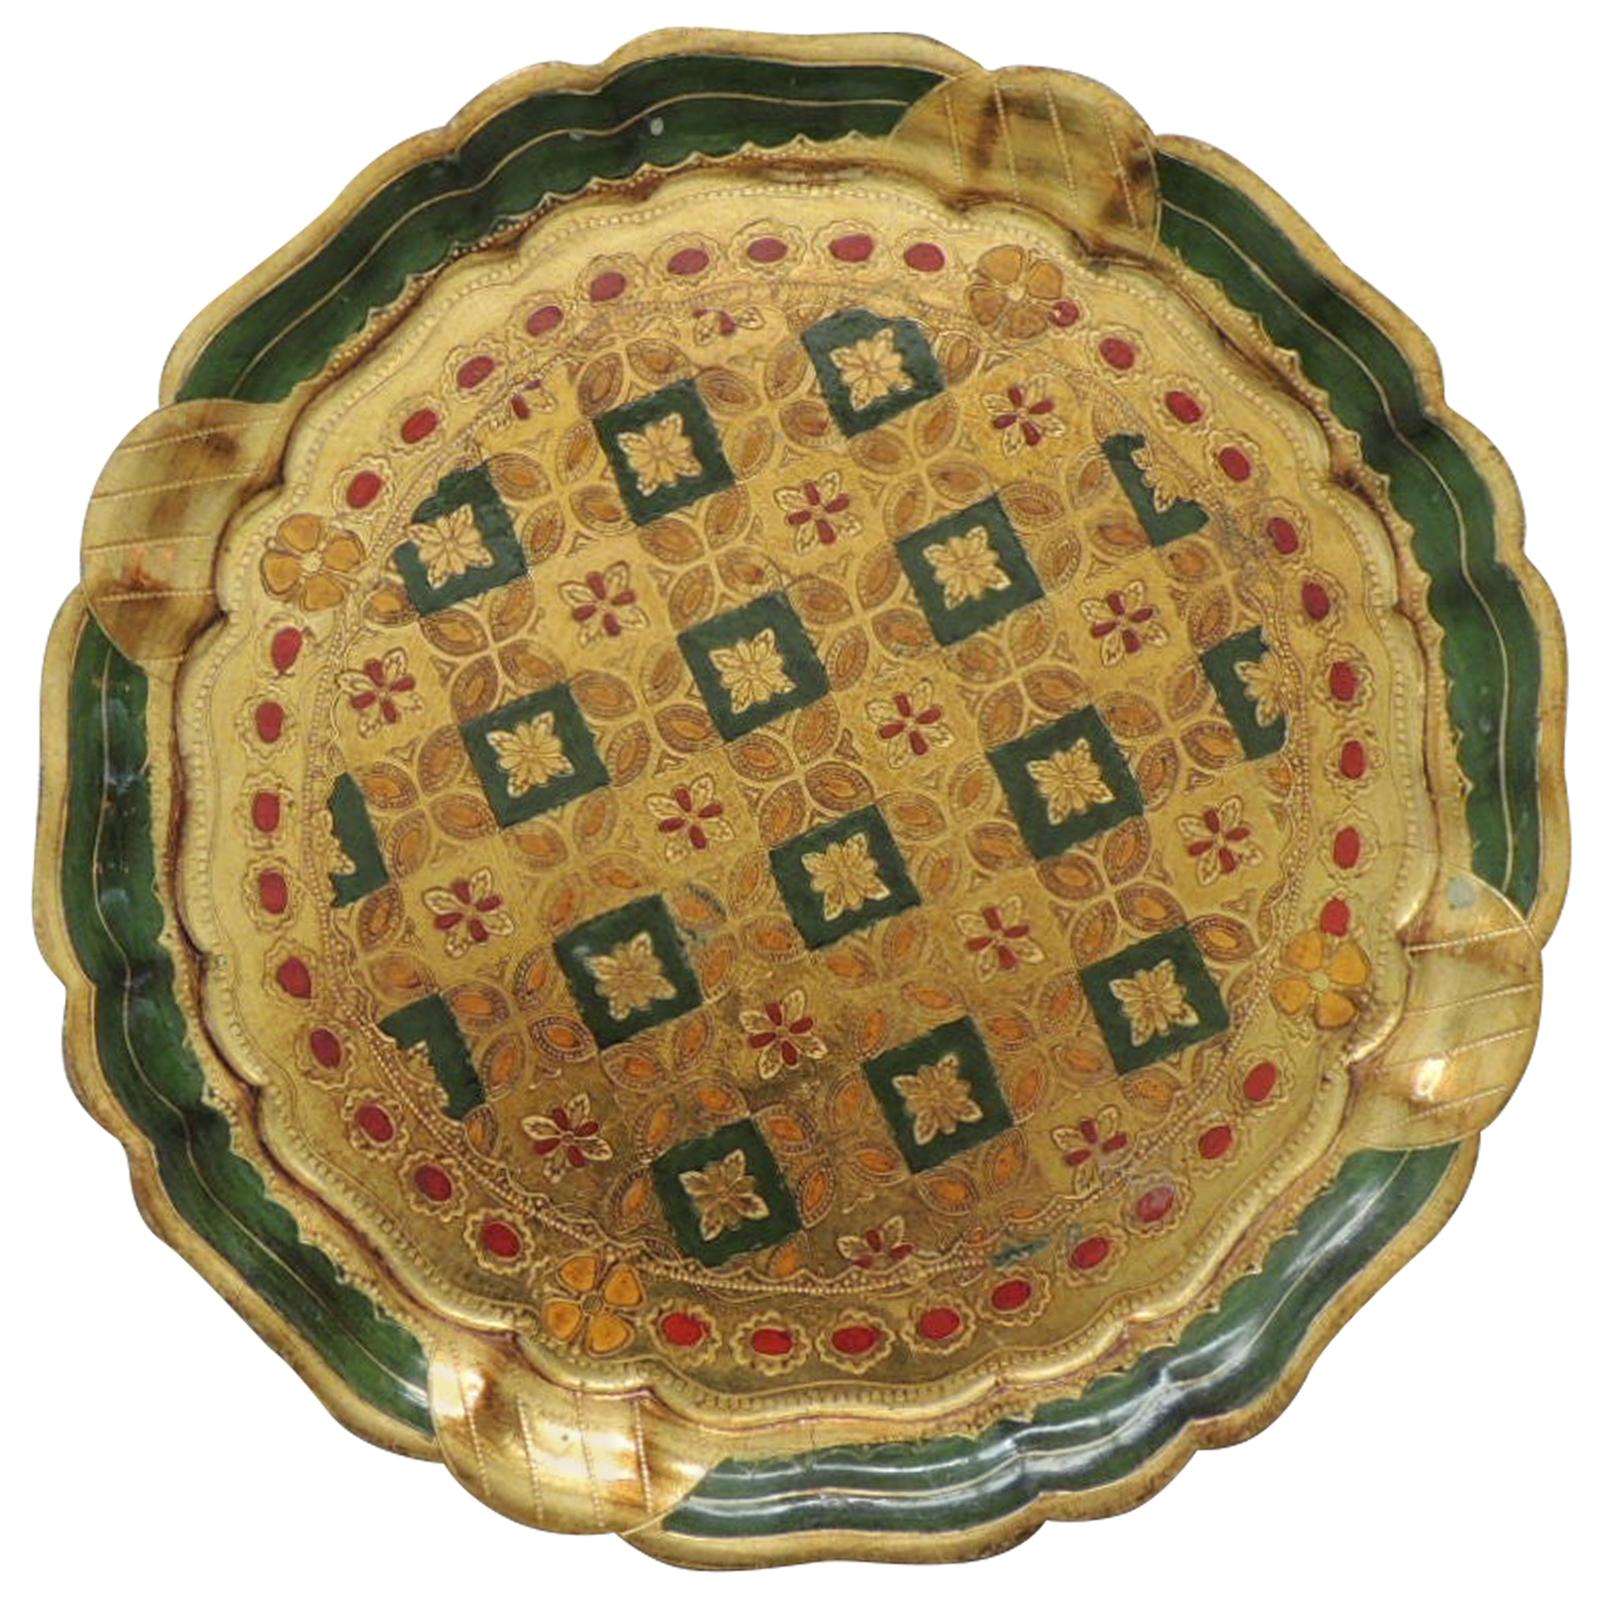 Vintage Round Green and Gold Florentine Serving Tray